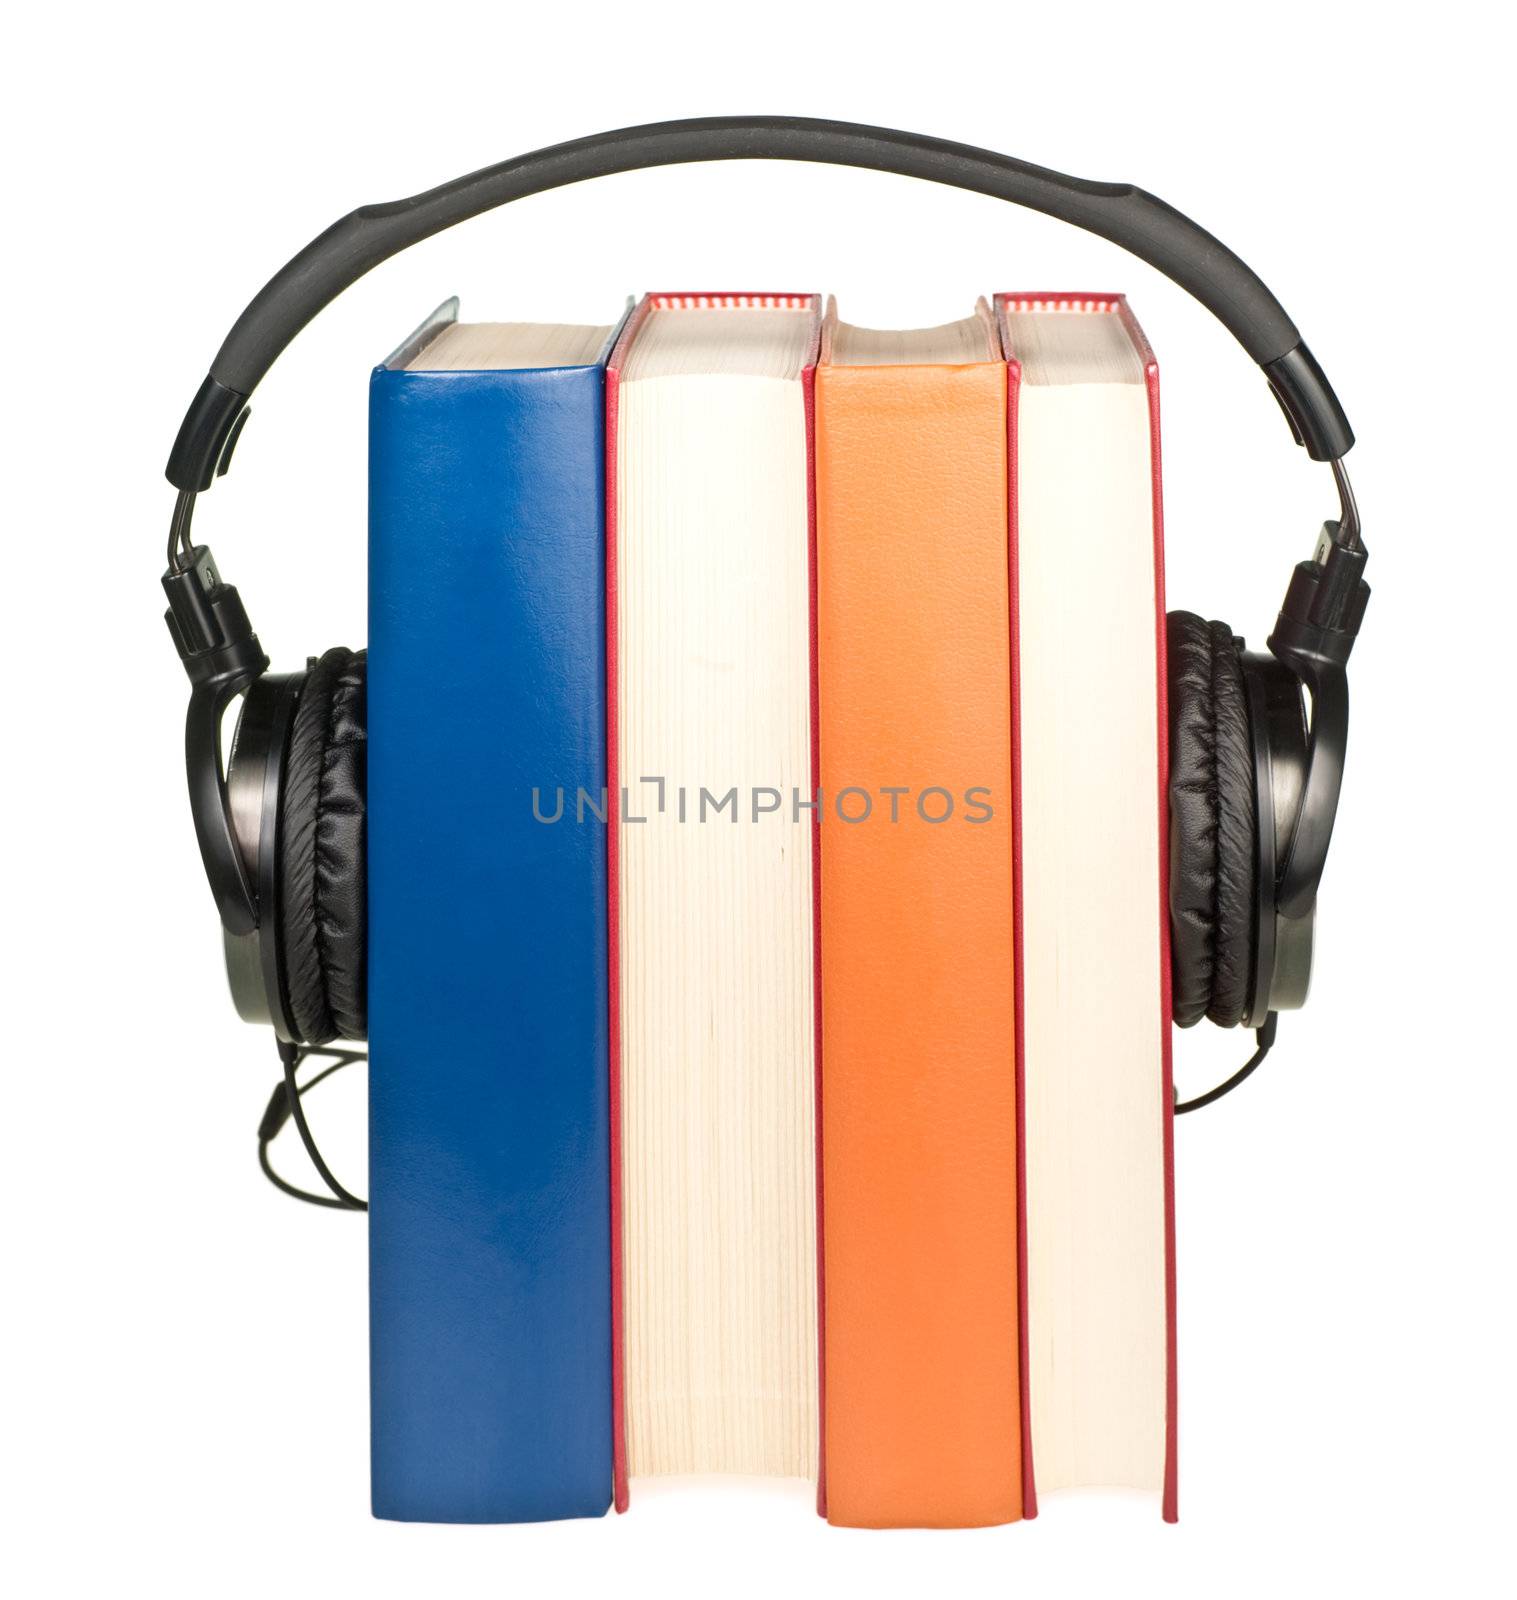 Books with headphones by naumoid